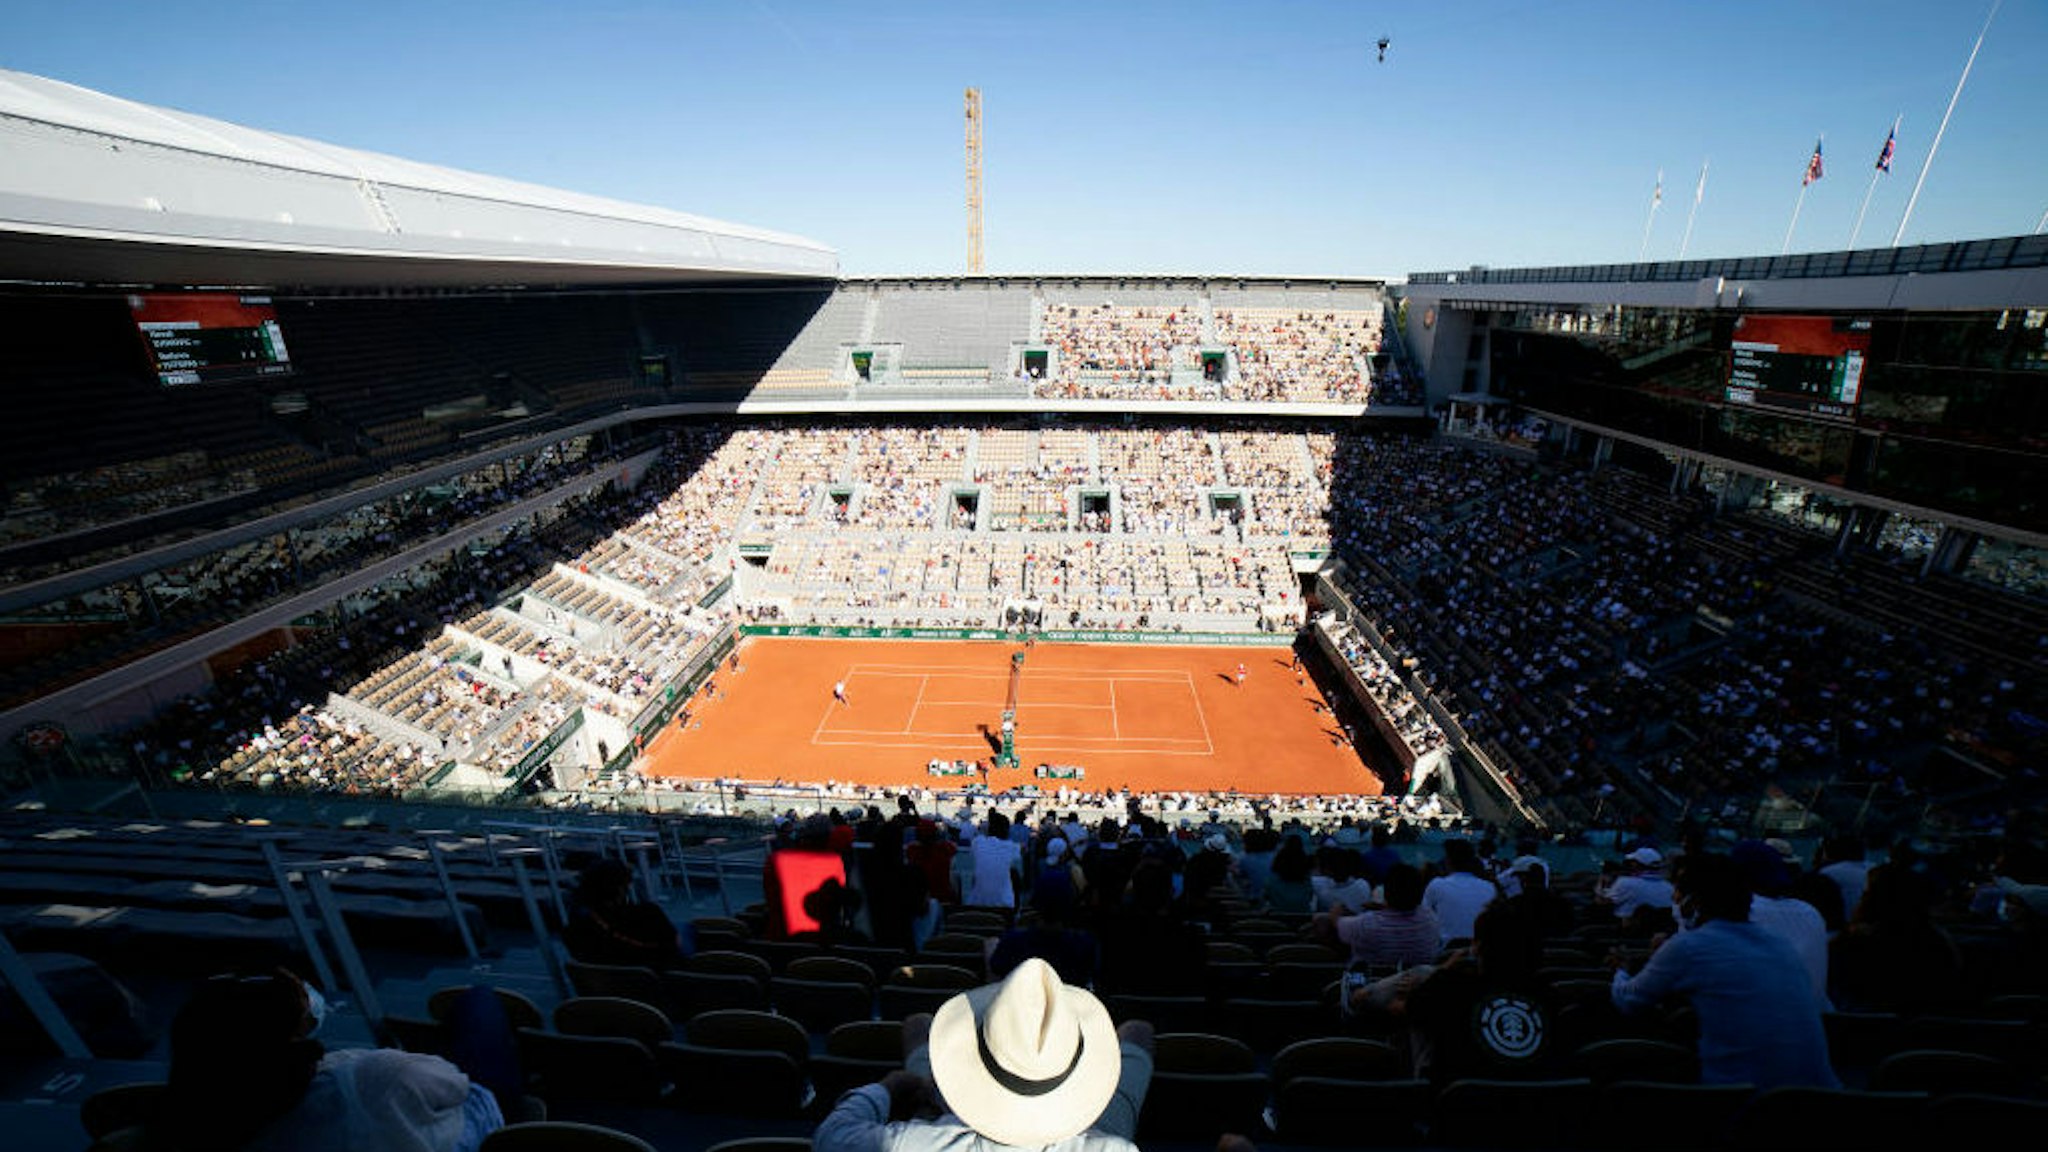 PARIS, FRANCE June 13. A general panoramic view of Novak Djokovic of Serbia in action against Stefanos Tsitsipas of Greece on Court Philippe-Chatrier during the Men's Singles Final at the 2021 French Open Tennis Tournament at Roland Garros on June 13th 2021 in Paris, France. (Photo by Tim Clayton/Corbis via Getty Images)